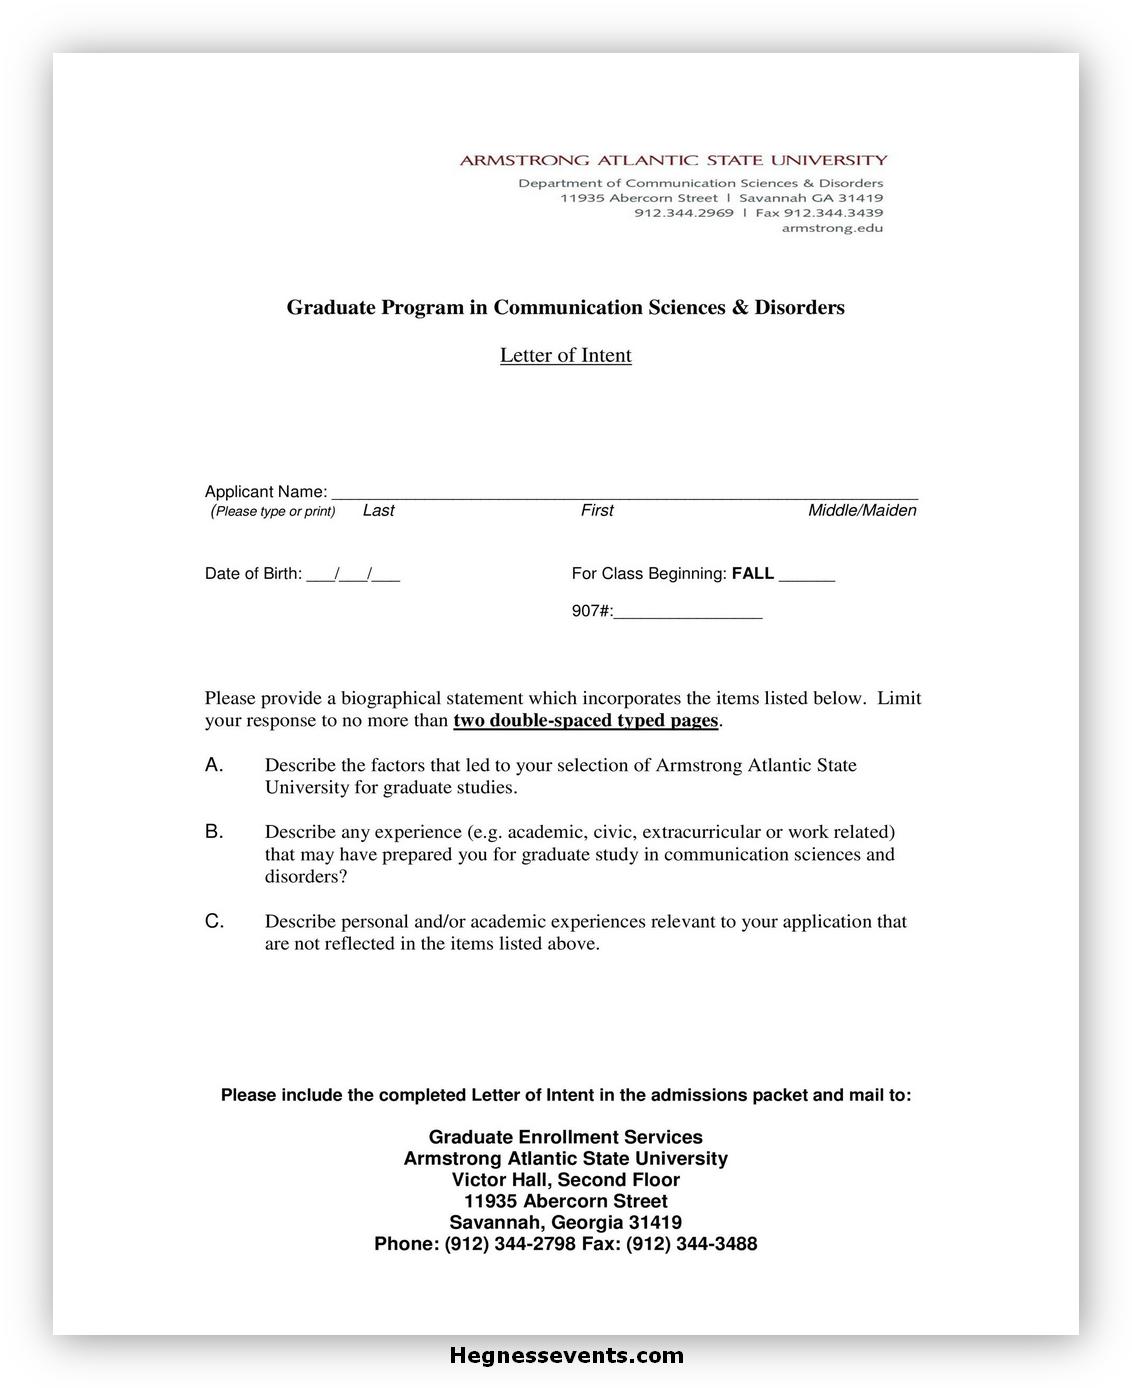 Sample Letter of Intent 03